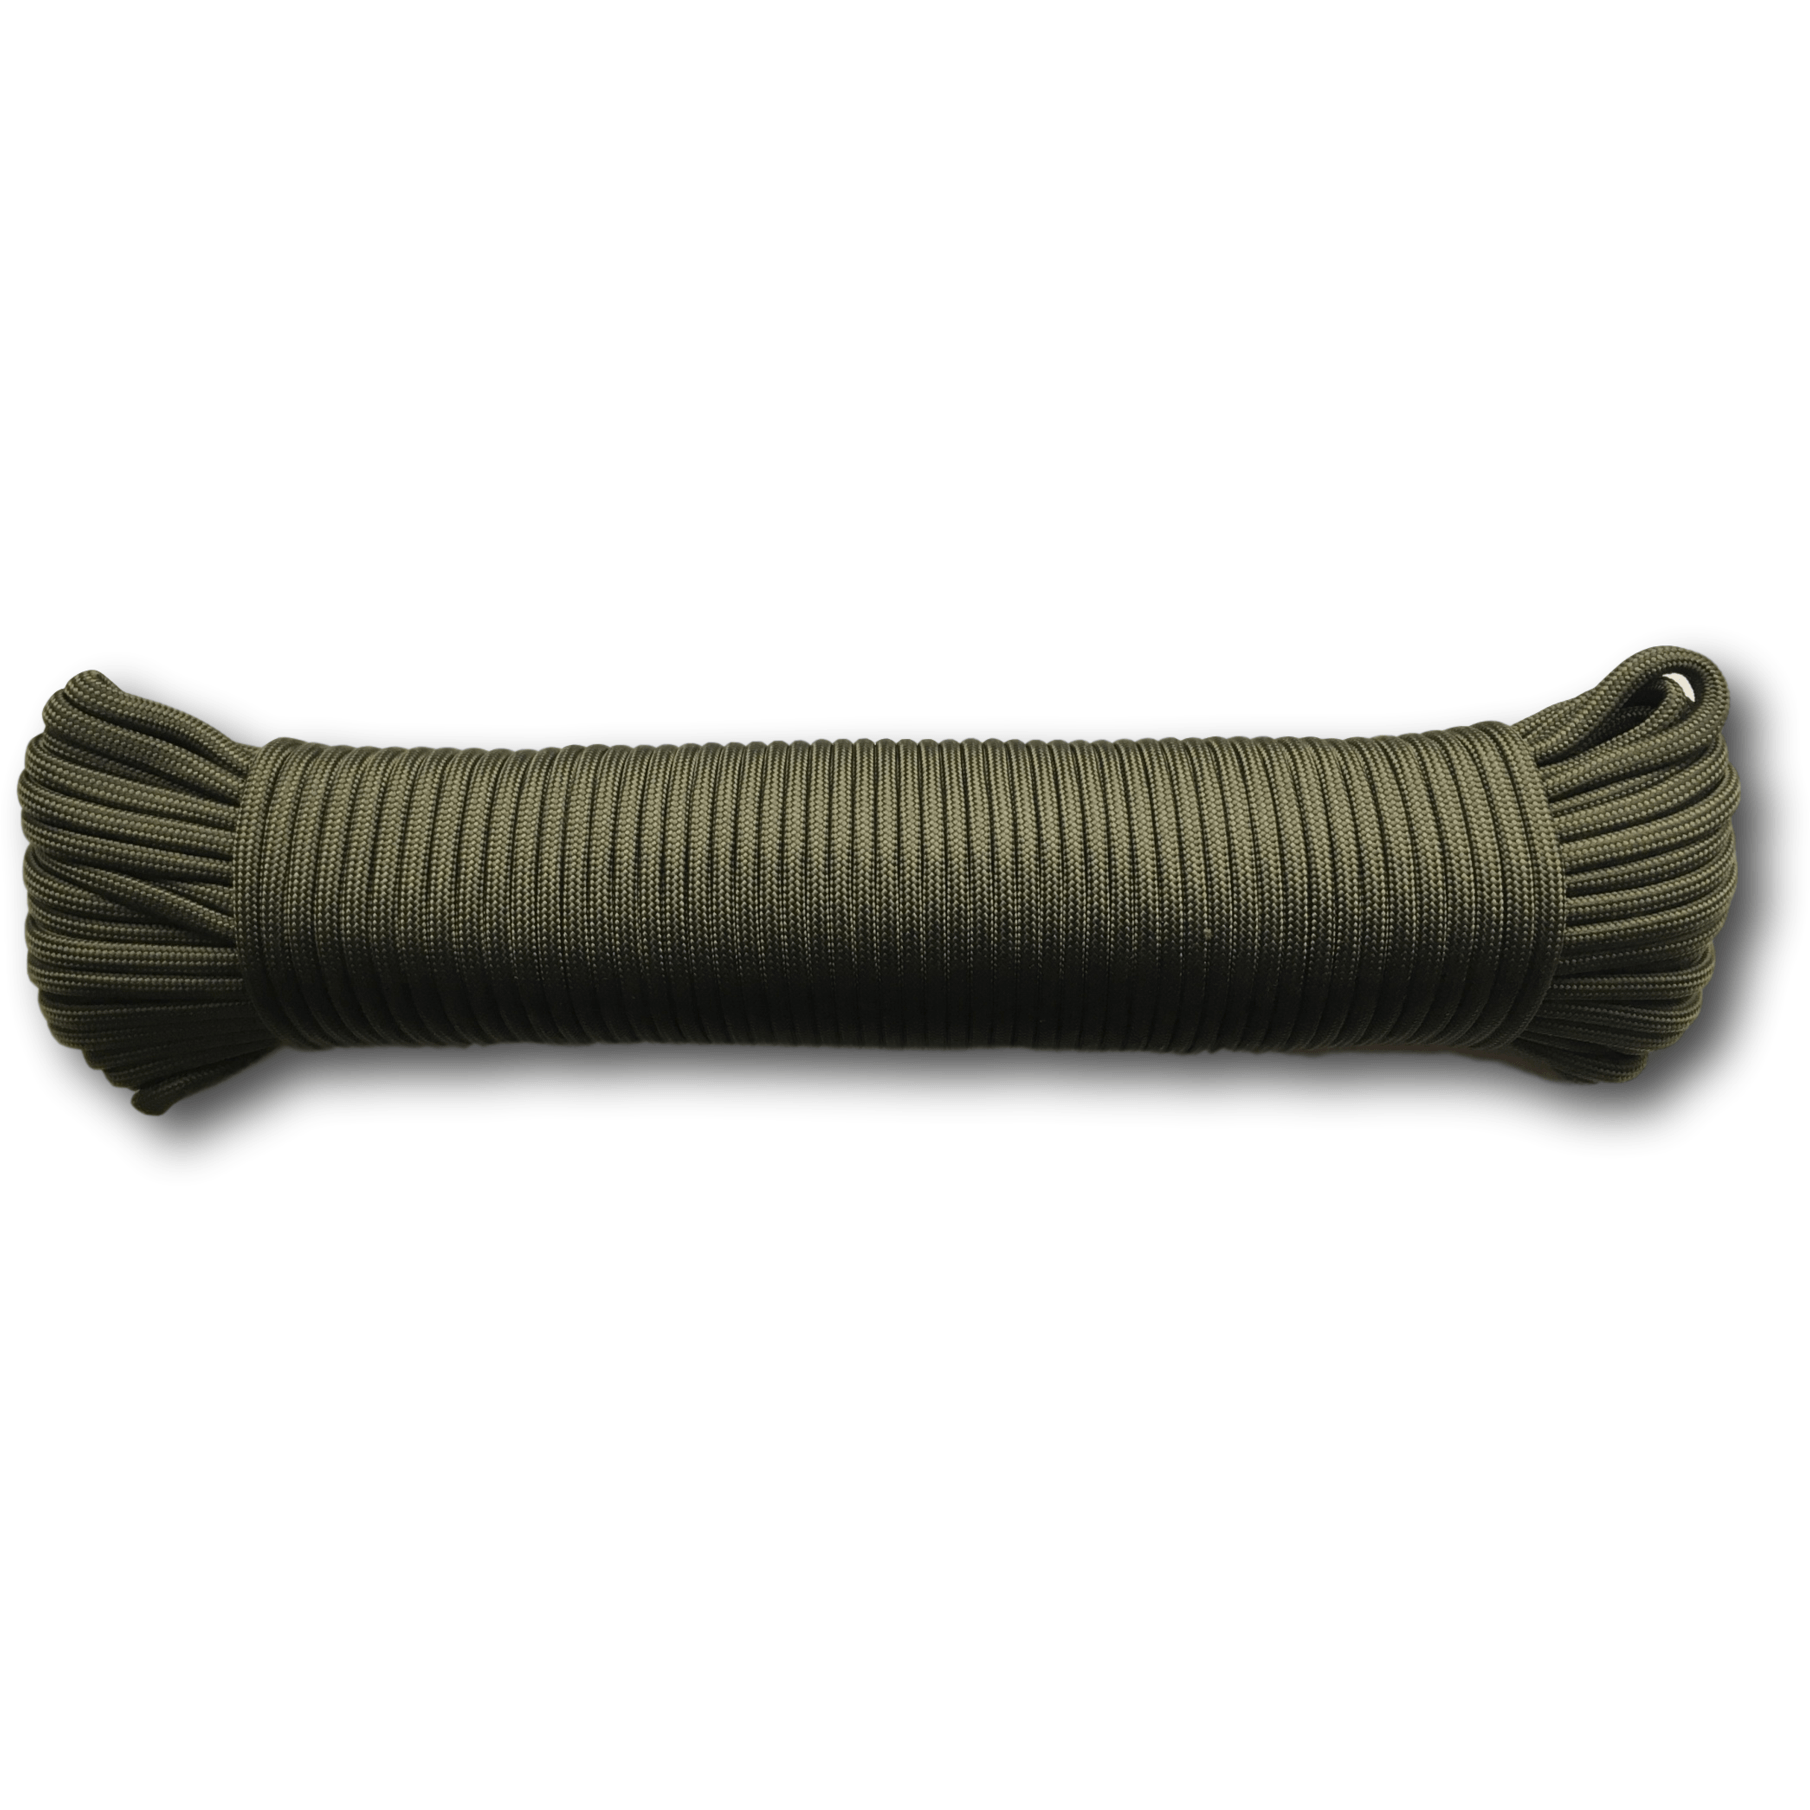 Paracord 550, Buy 4 mm 7 Strand 550 Paracord Online